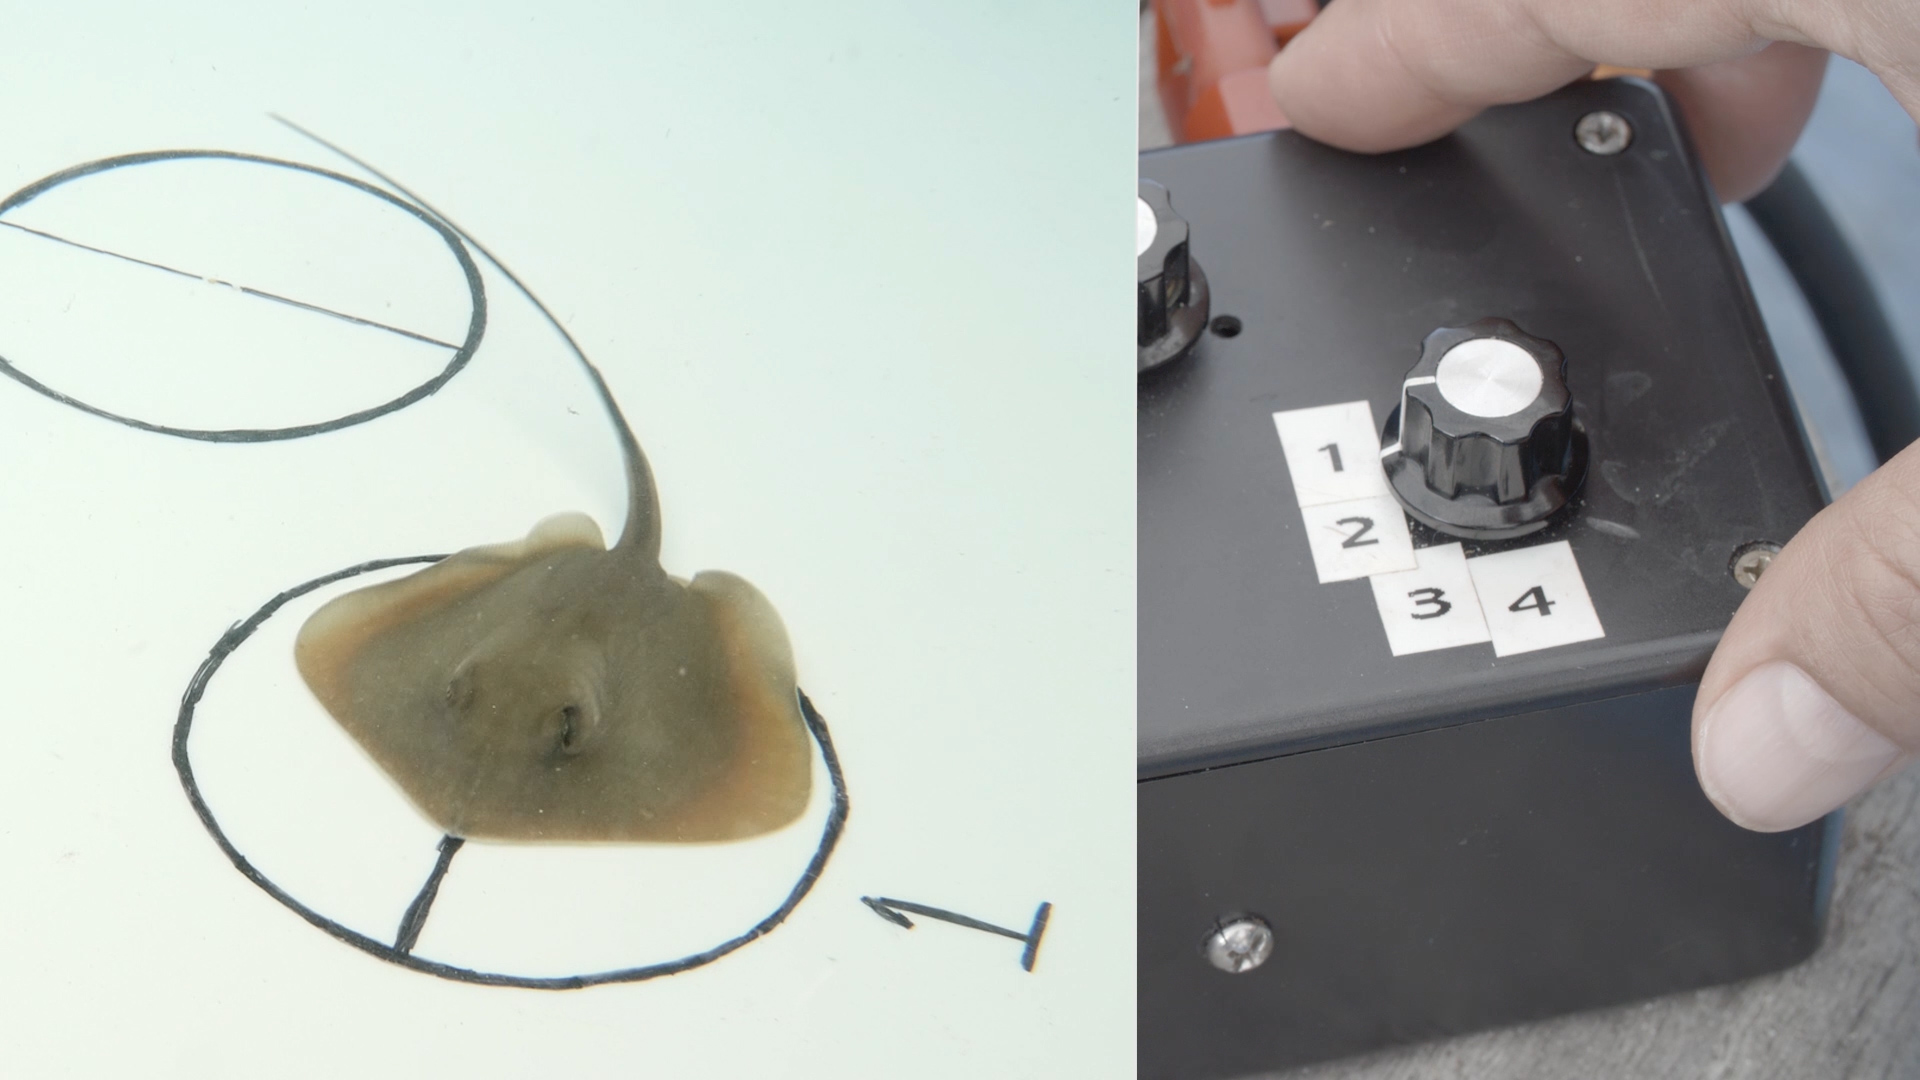 The white plate seen on the left has electric dipoles distributed across its surface. Dr. Kajiura can control the dipoles to test rays' responses to prey-simulating electric fields.